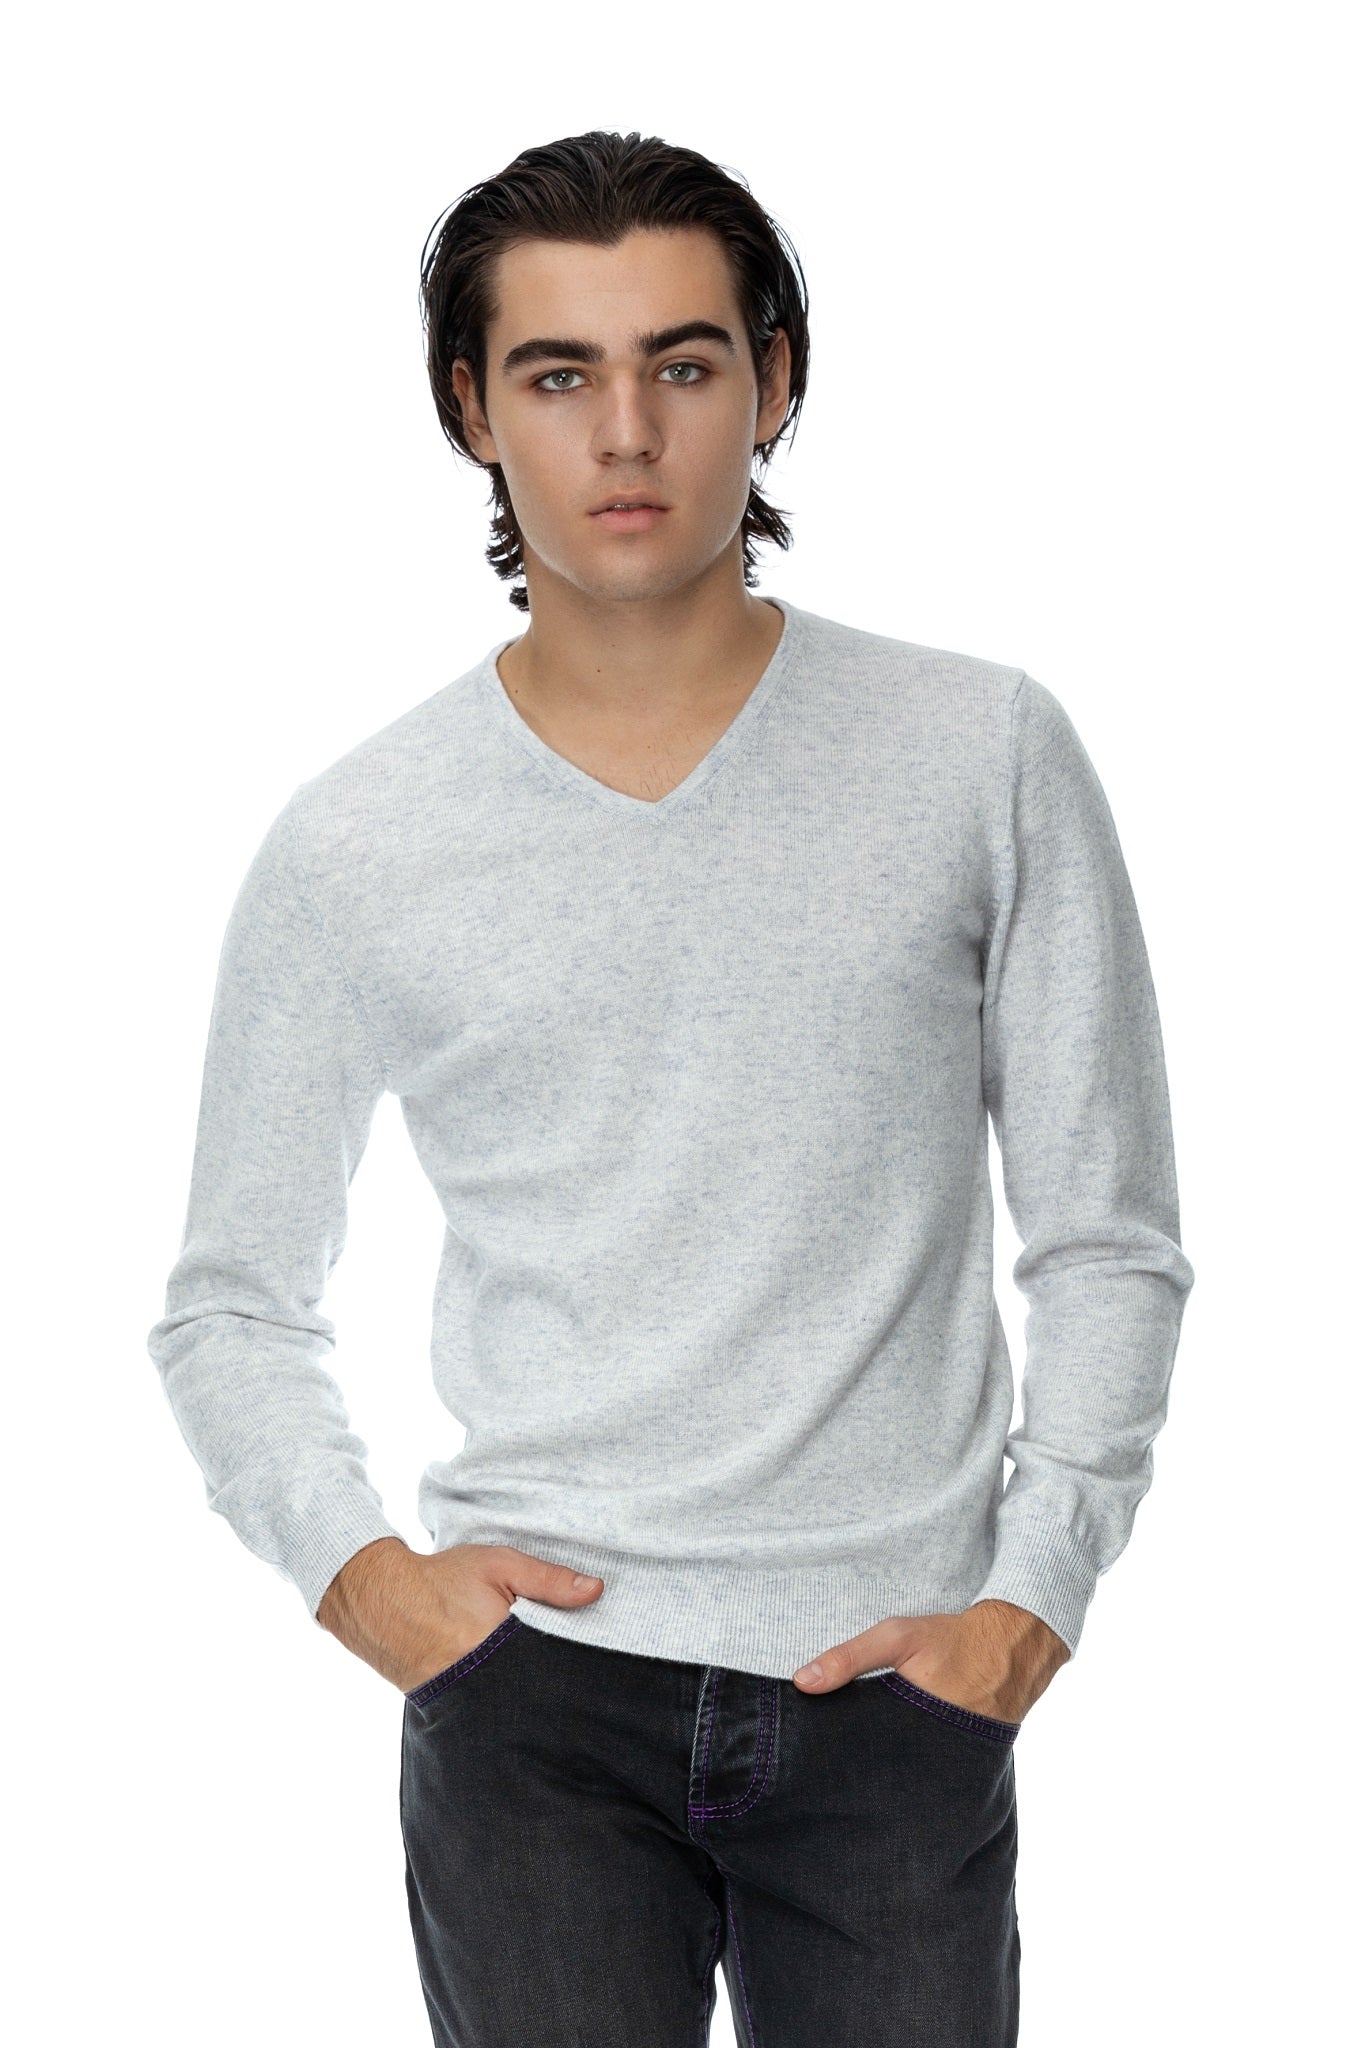 Gray sweater with V-neck made of merino wool and cashmere